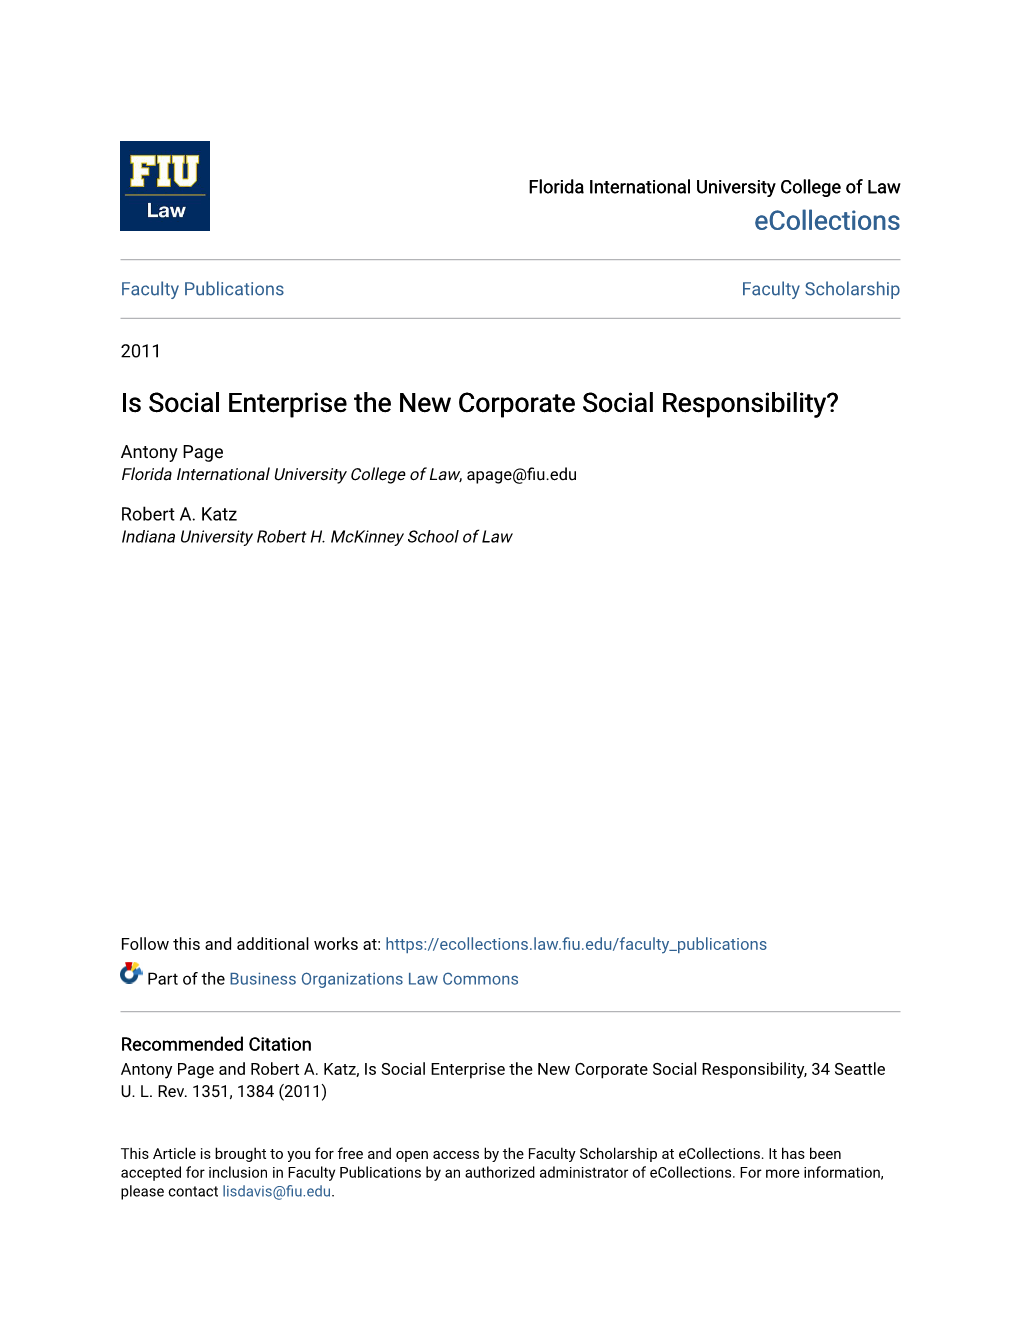 Is Social Enterprise the New Corporate Social Responsibility?